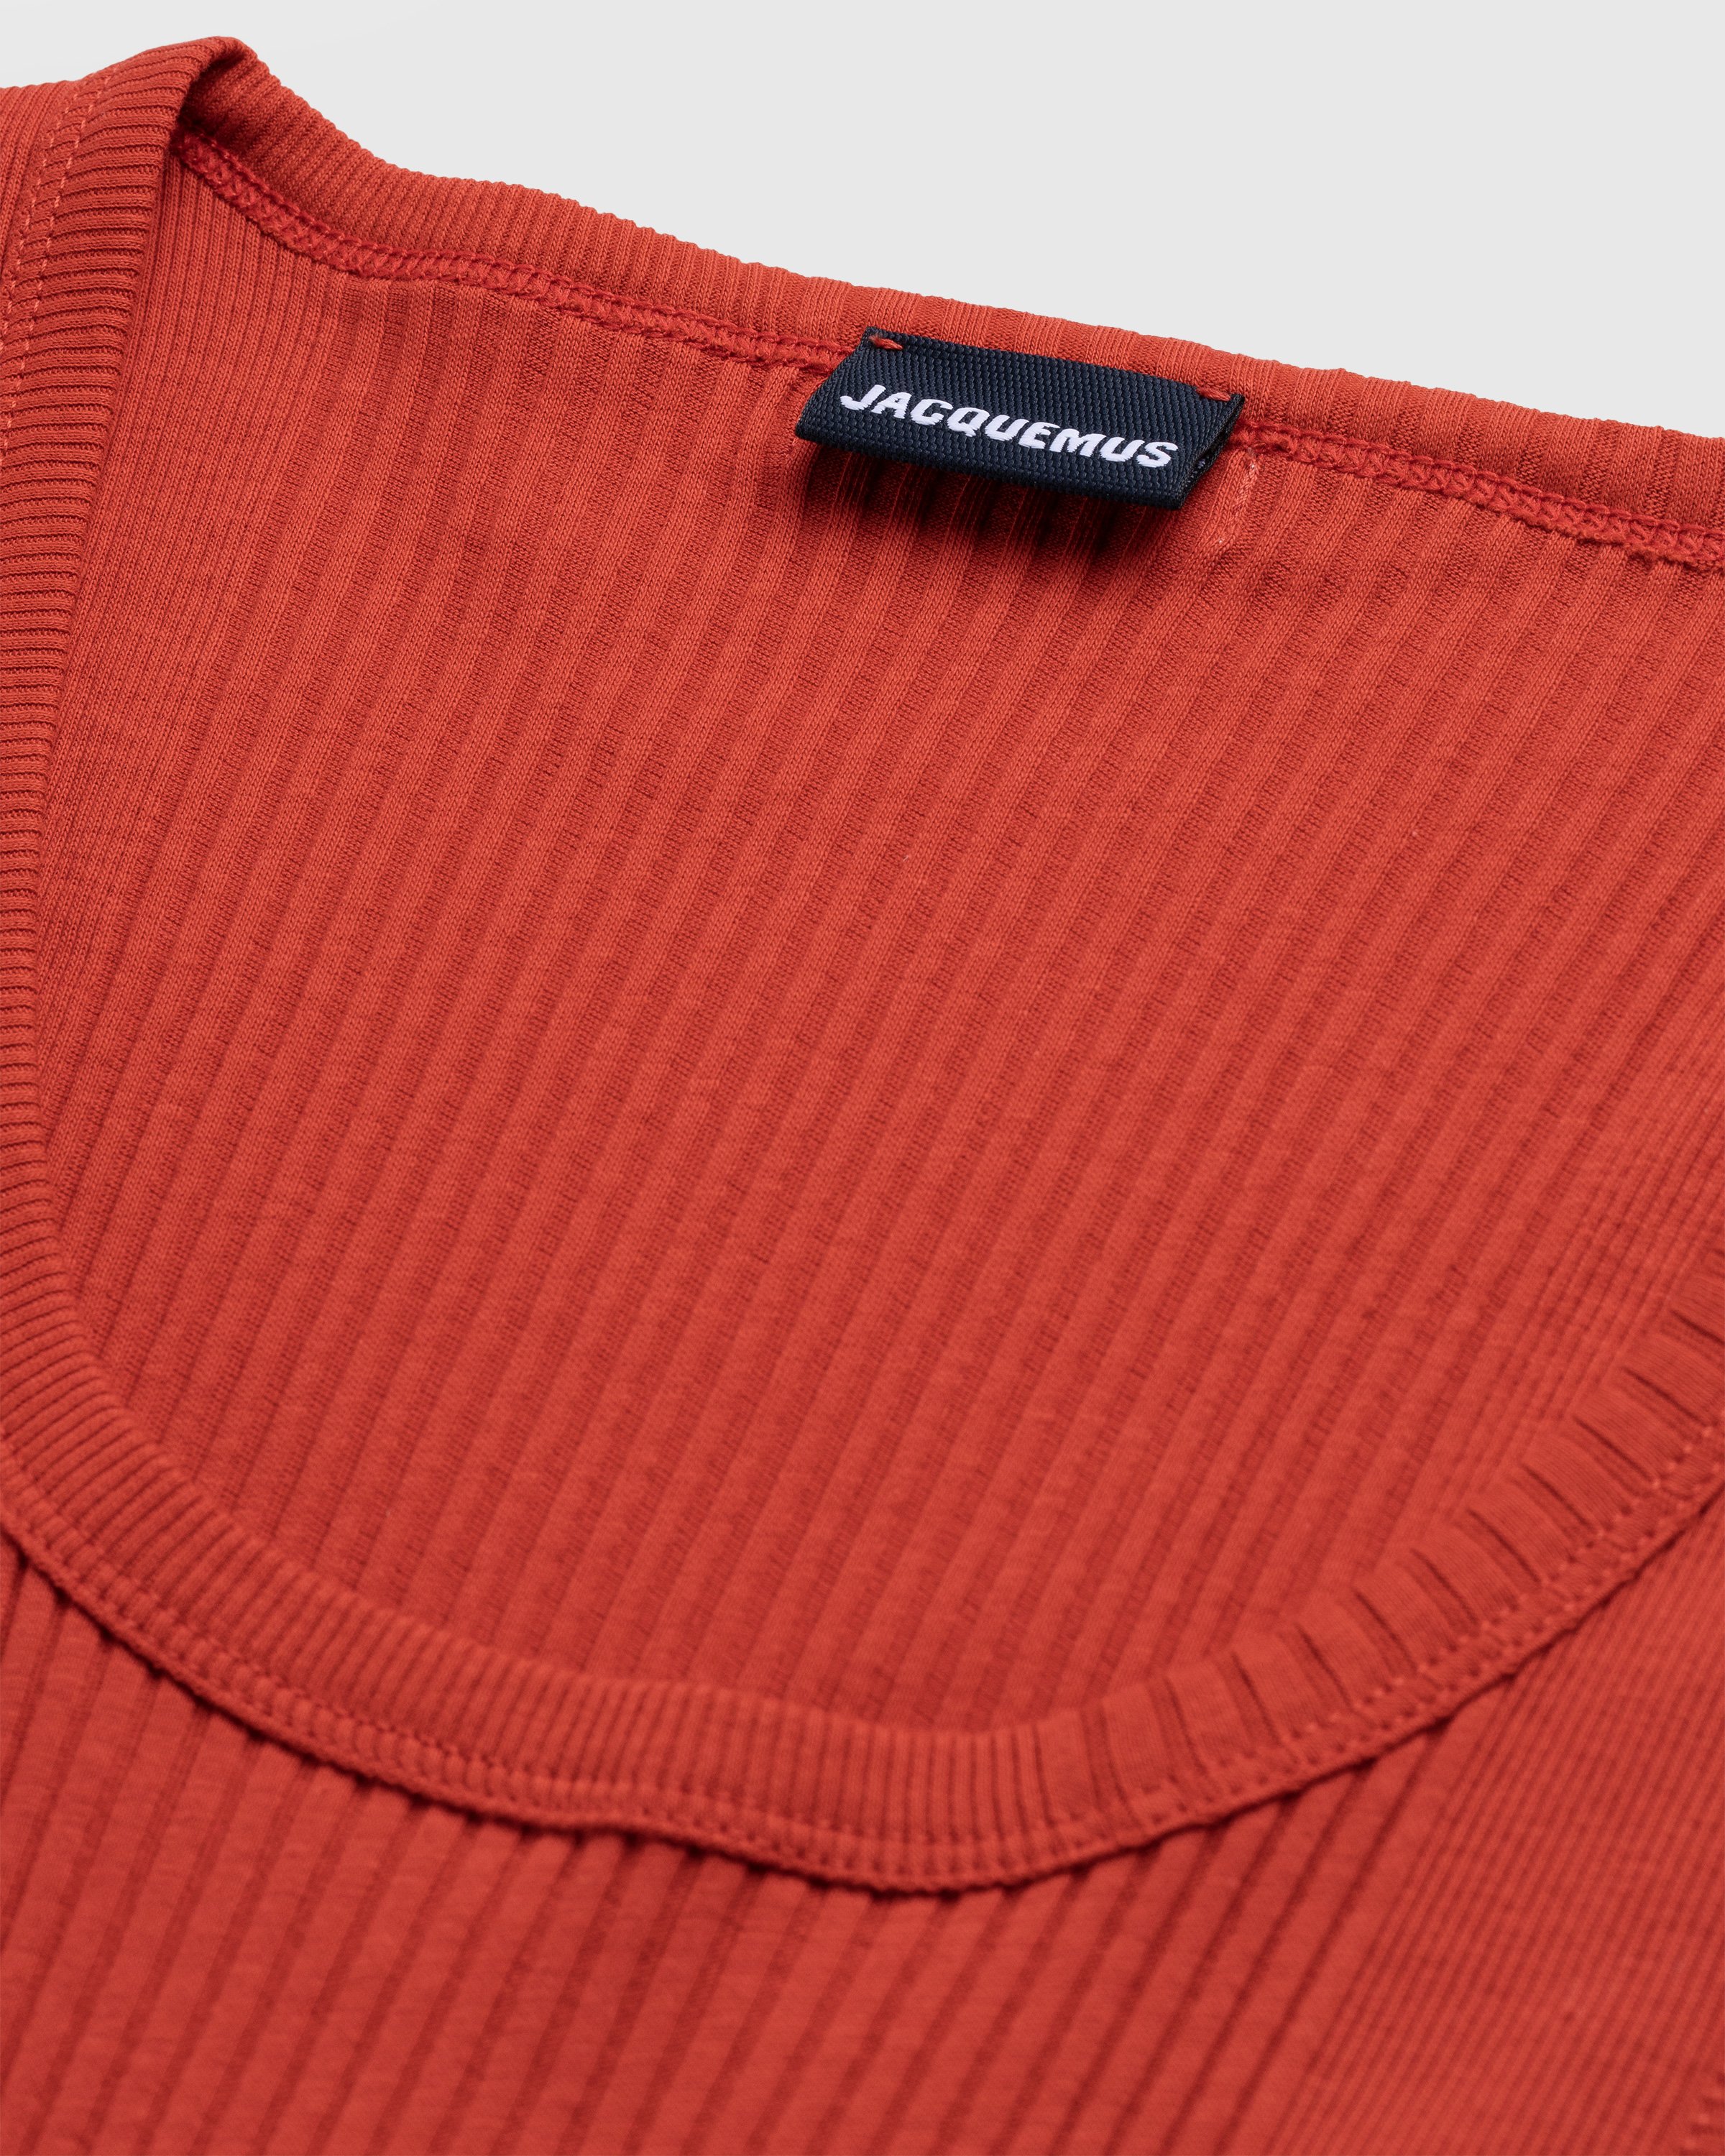 JACQUEMUS - Le Débardeur Caraco Red - Clothing - RED - Image 5